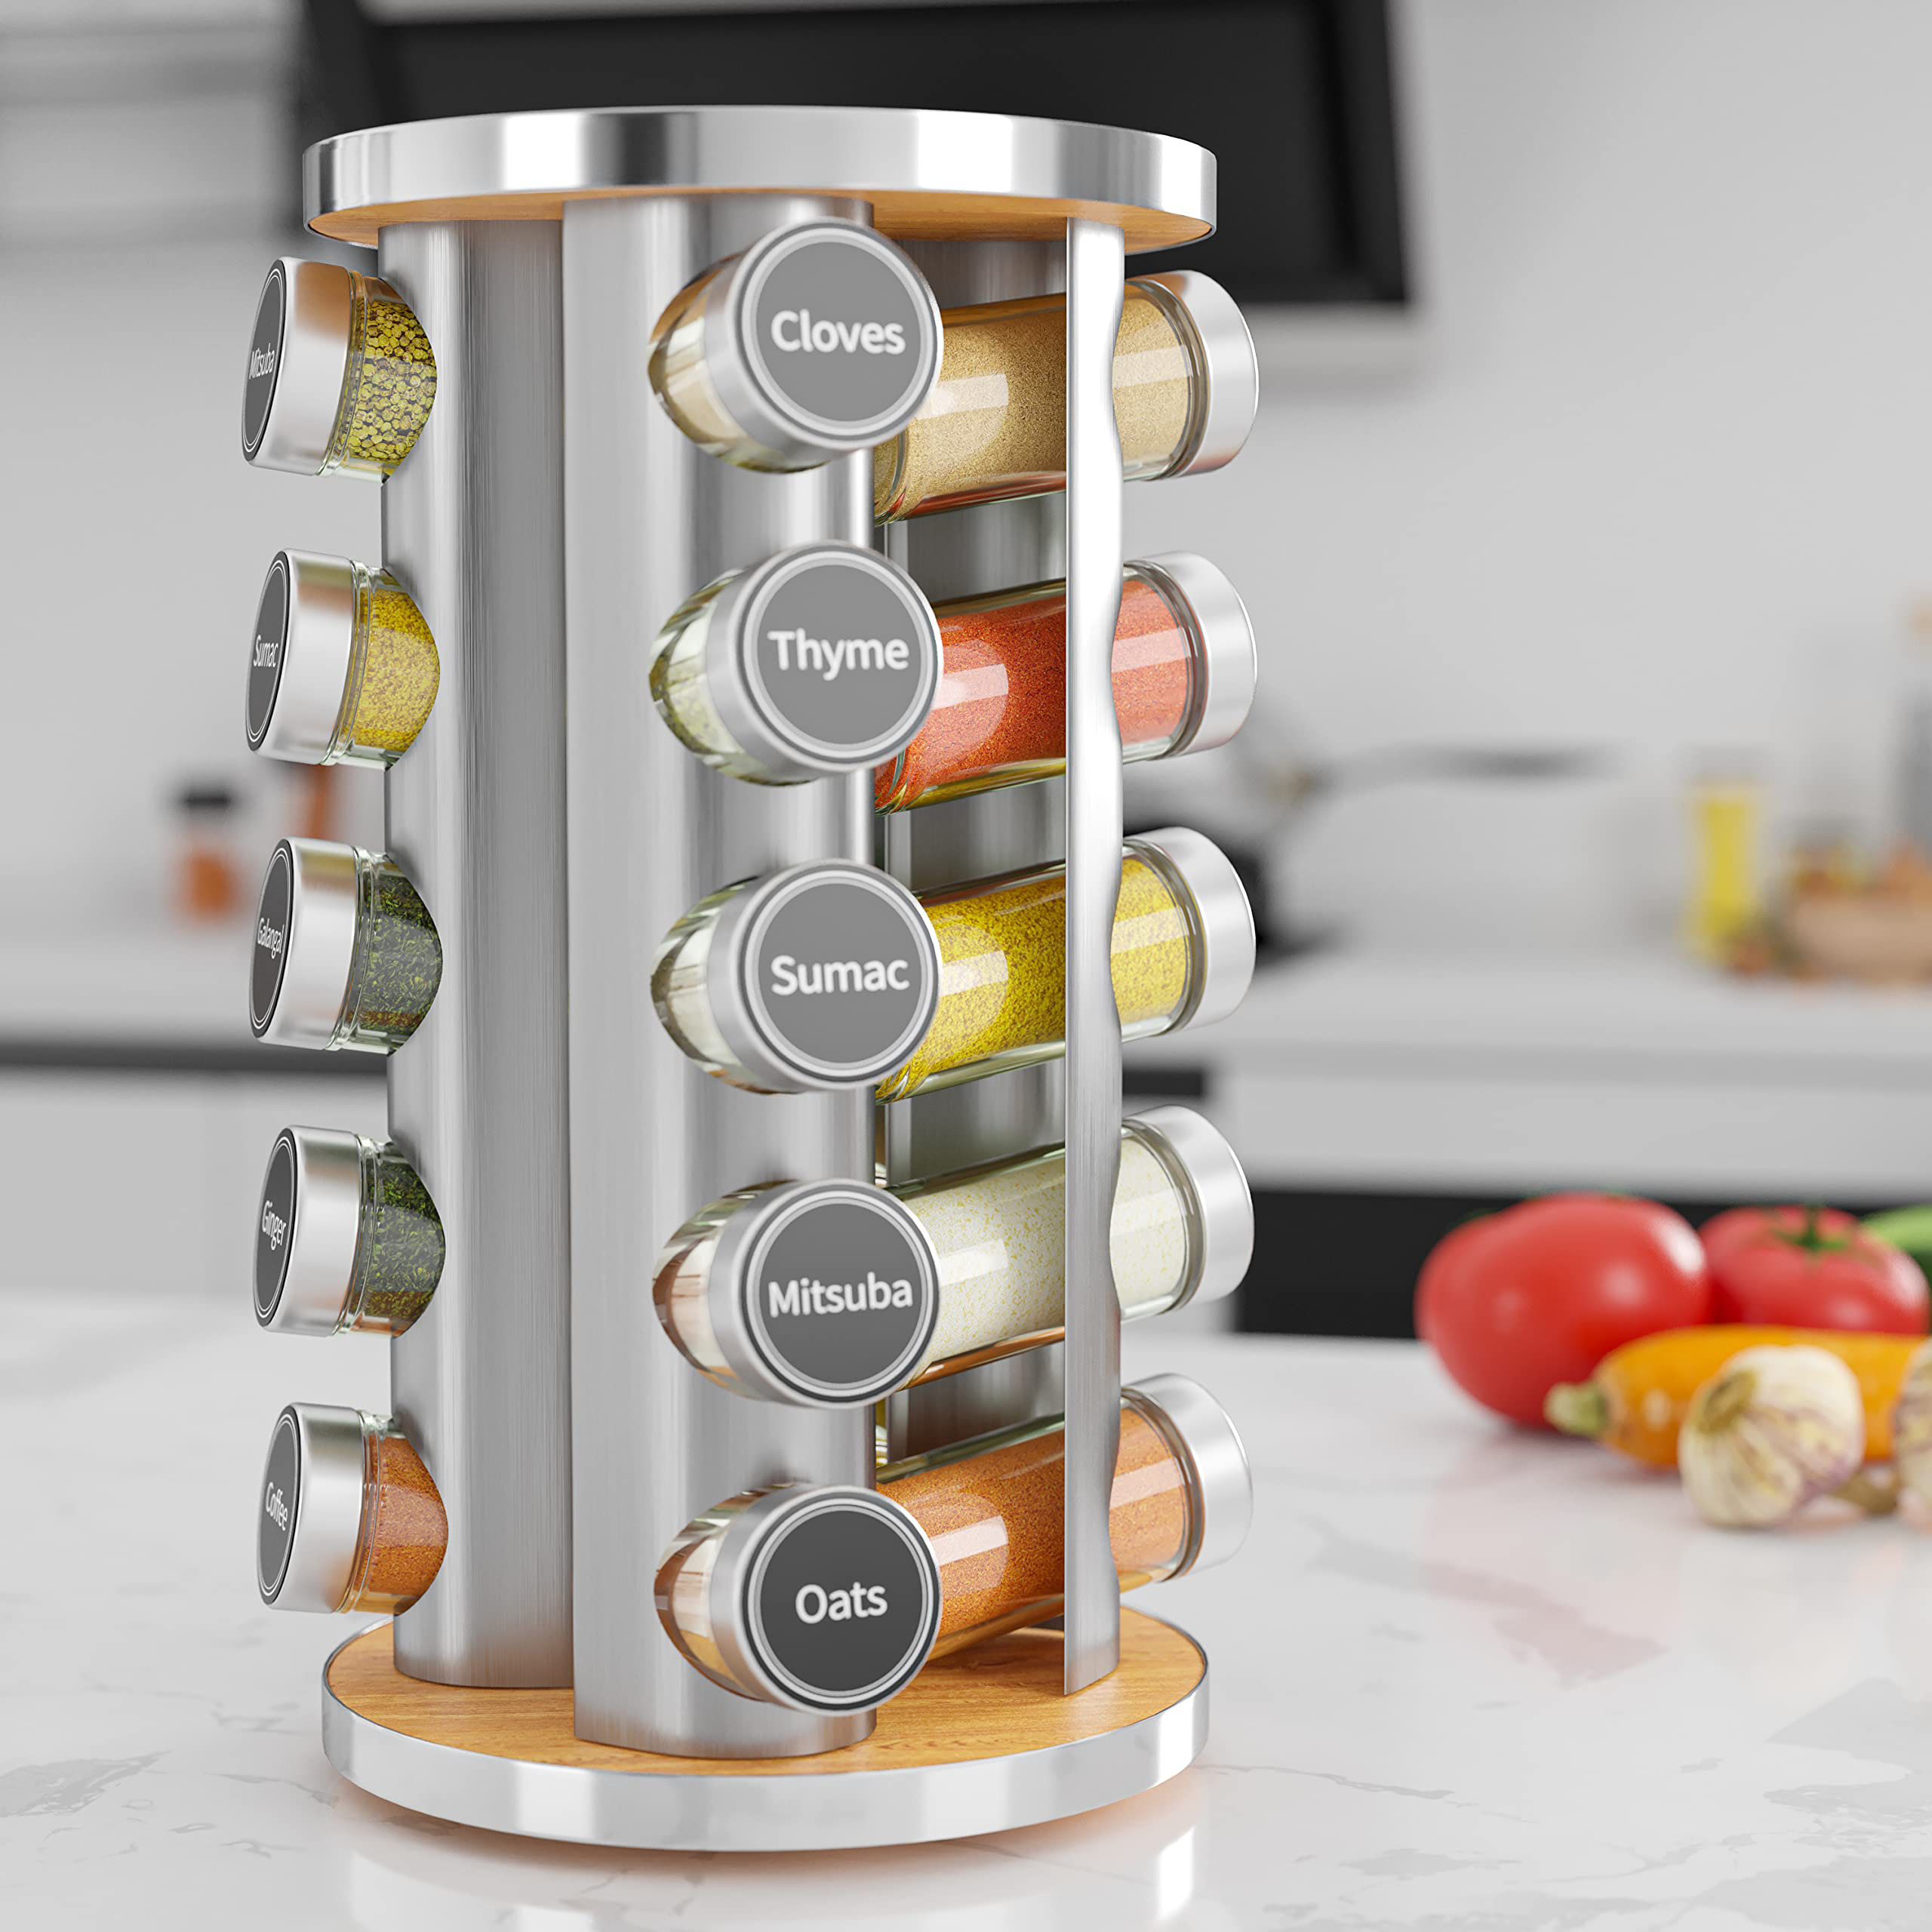 Orii 20 Jar Spice Rack Stainless Steel Filled with Spices - Standing Rack  Shelf Holder & Countertop Spice Rack Tower Organizer for Kitchen Spices  with